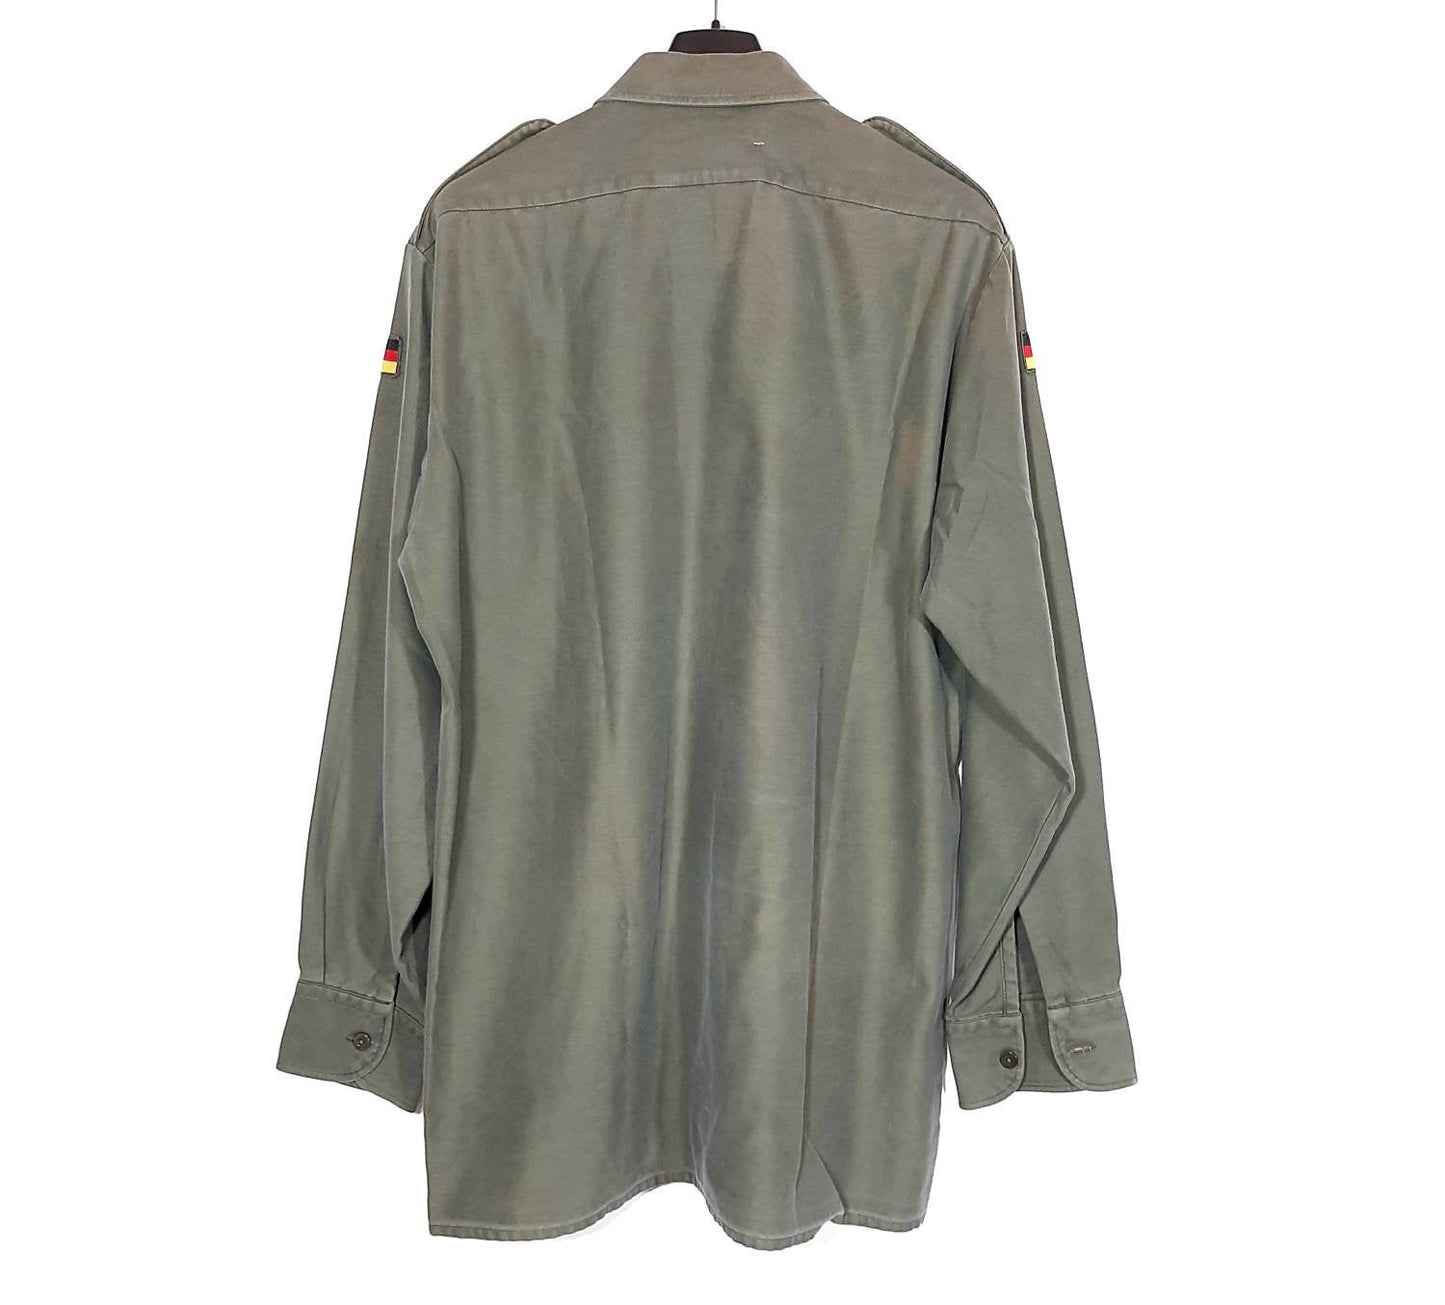 1970s east germany military green field shirt, great condition.